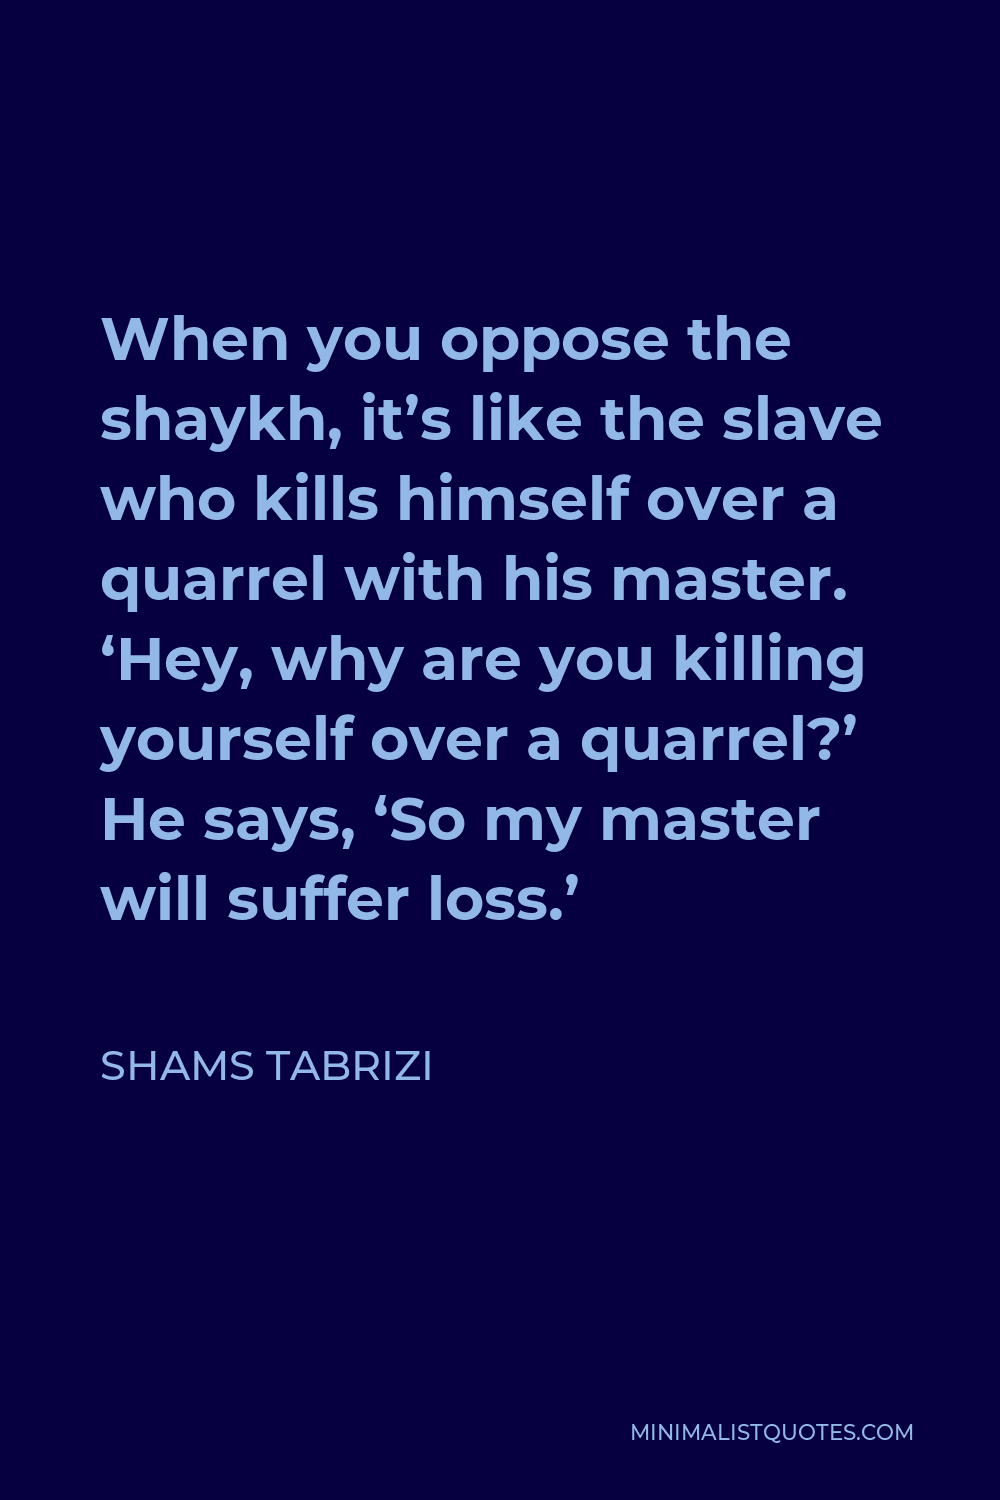 Shams Tabrizi Quote - When you oppose the shaykh, it’s like the slave who kills himself over a quarrel with his master. ‘Hey, why are you killing yourself over a quarrel?’ He says, ‘So my master will suffer loss.’